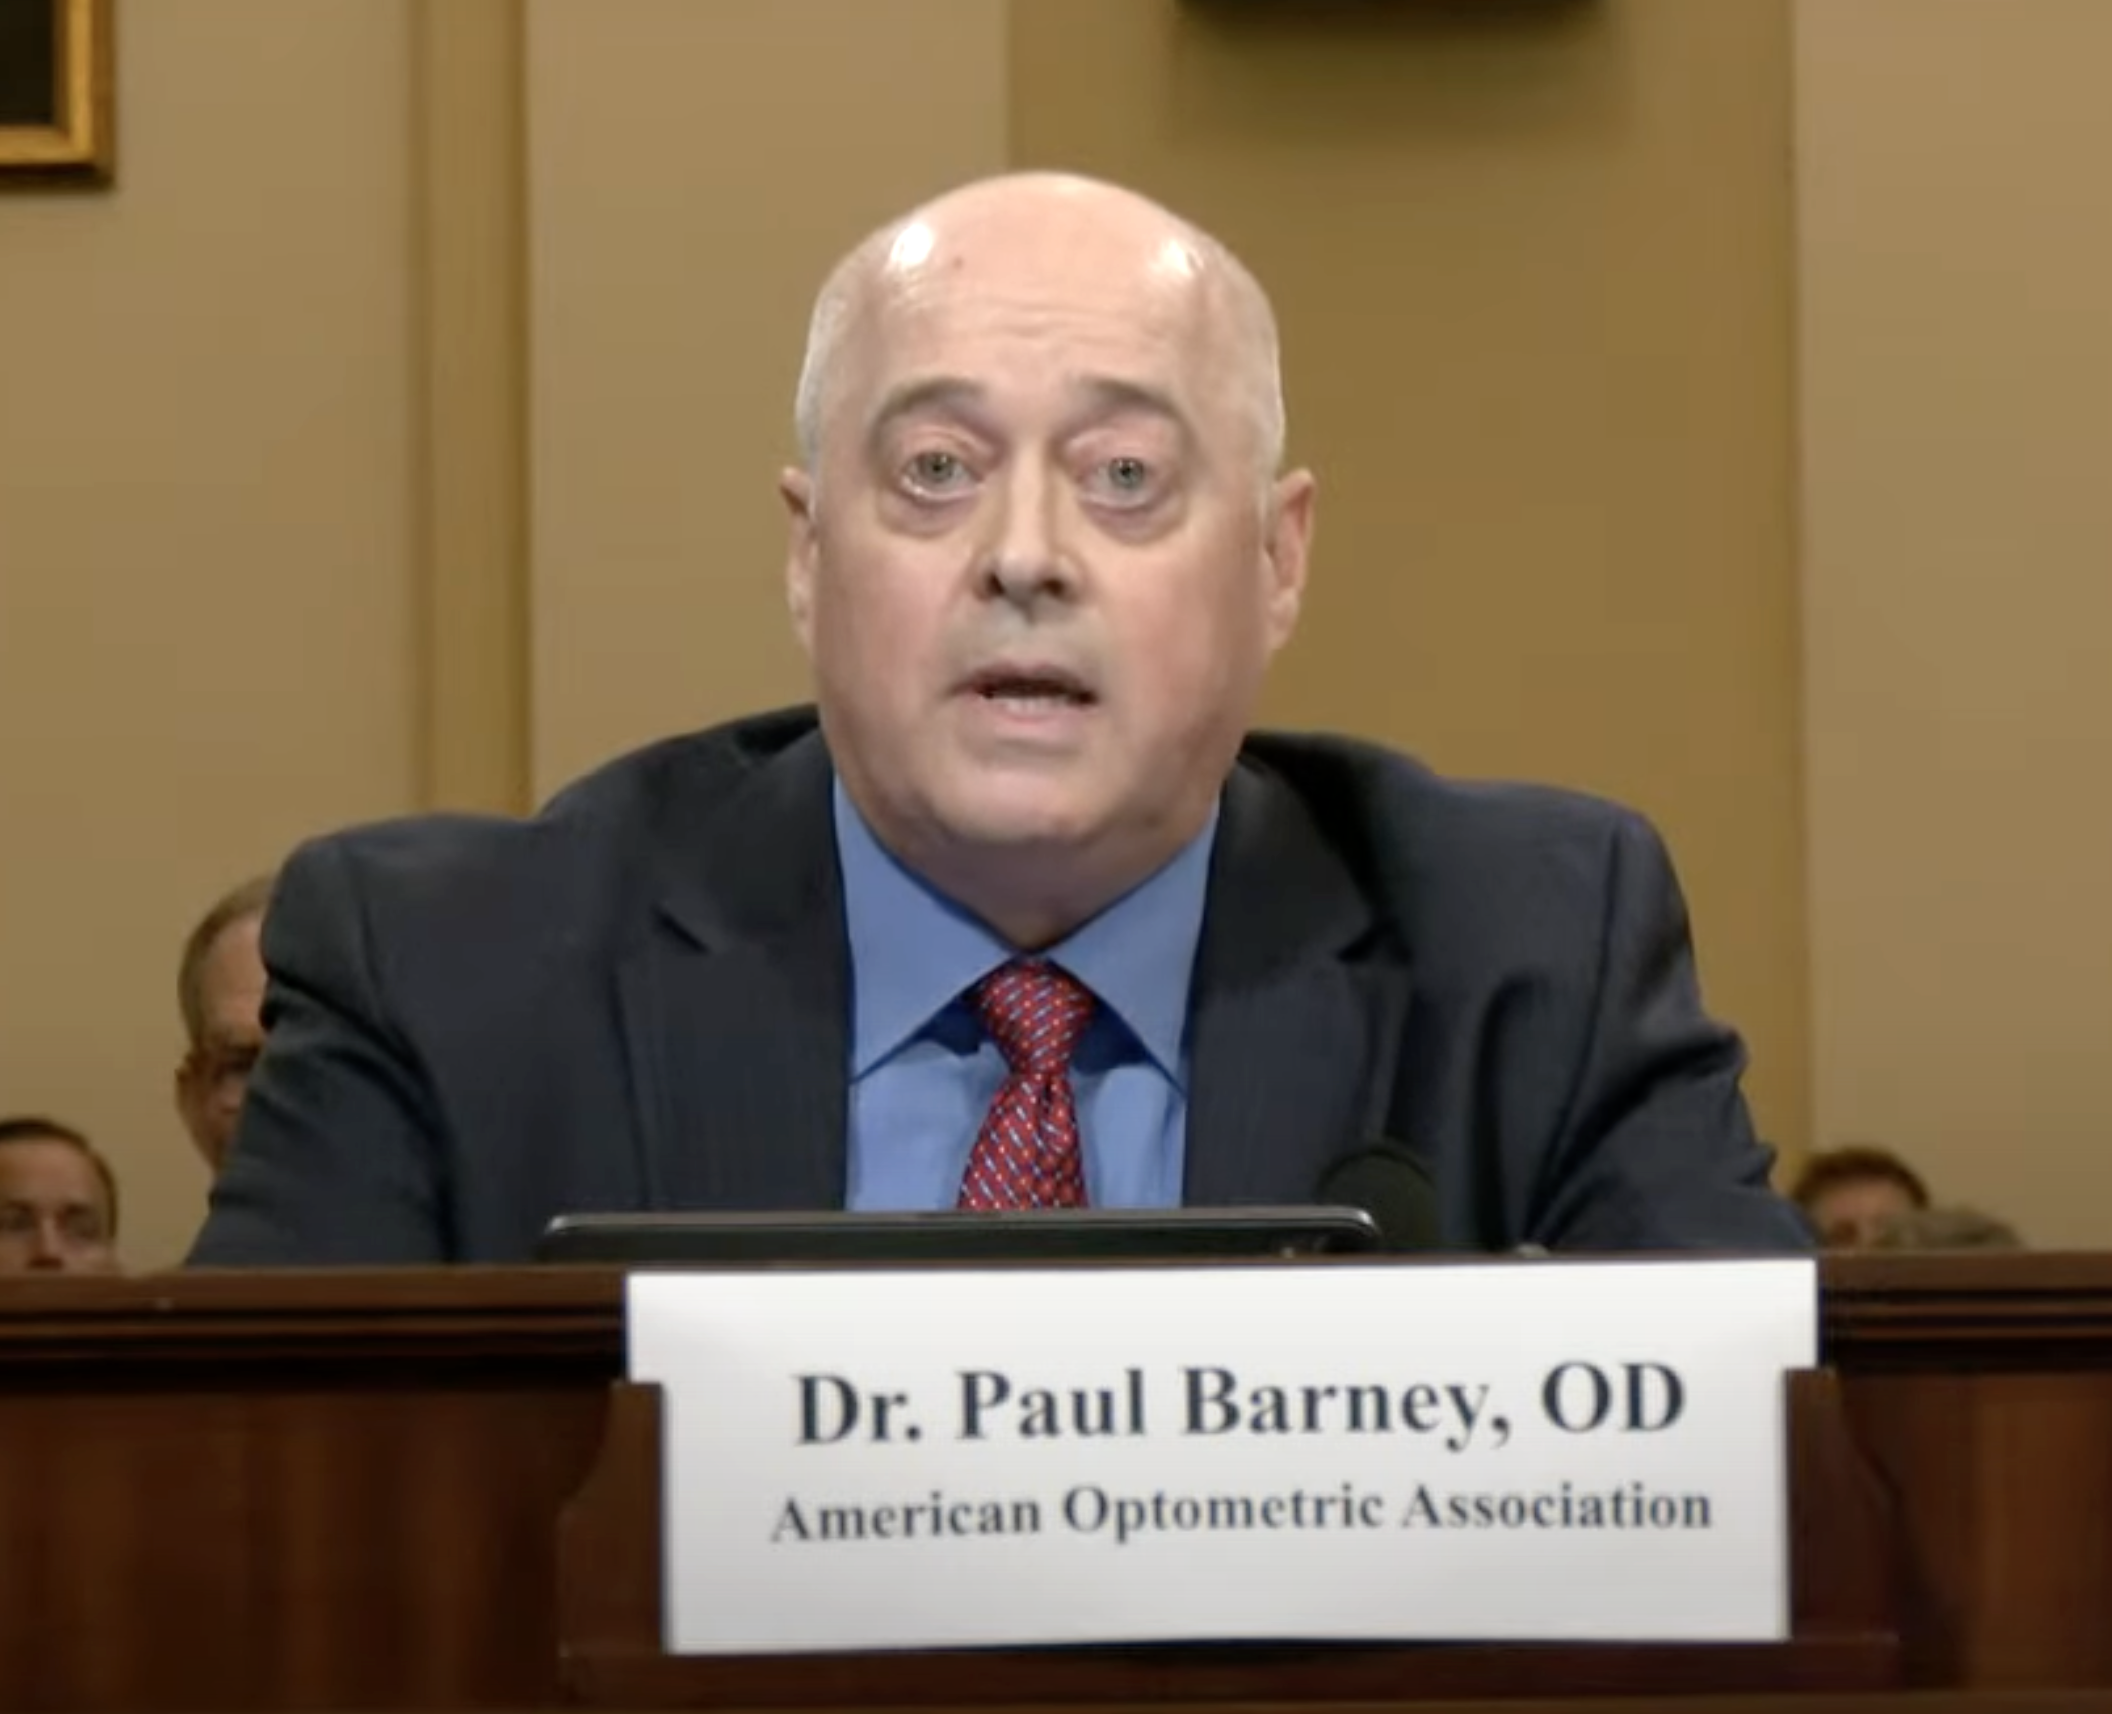 Paul Barney, OD, of the AOA set the record straight before legislators on Tuesday, explaining that current educational curricula include laser and other surgical techniques at all colleges of optometry.